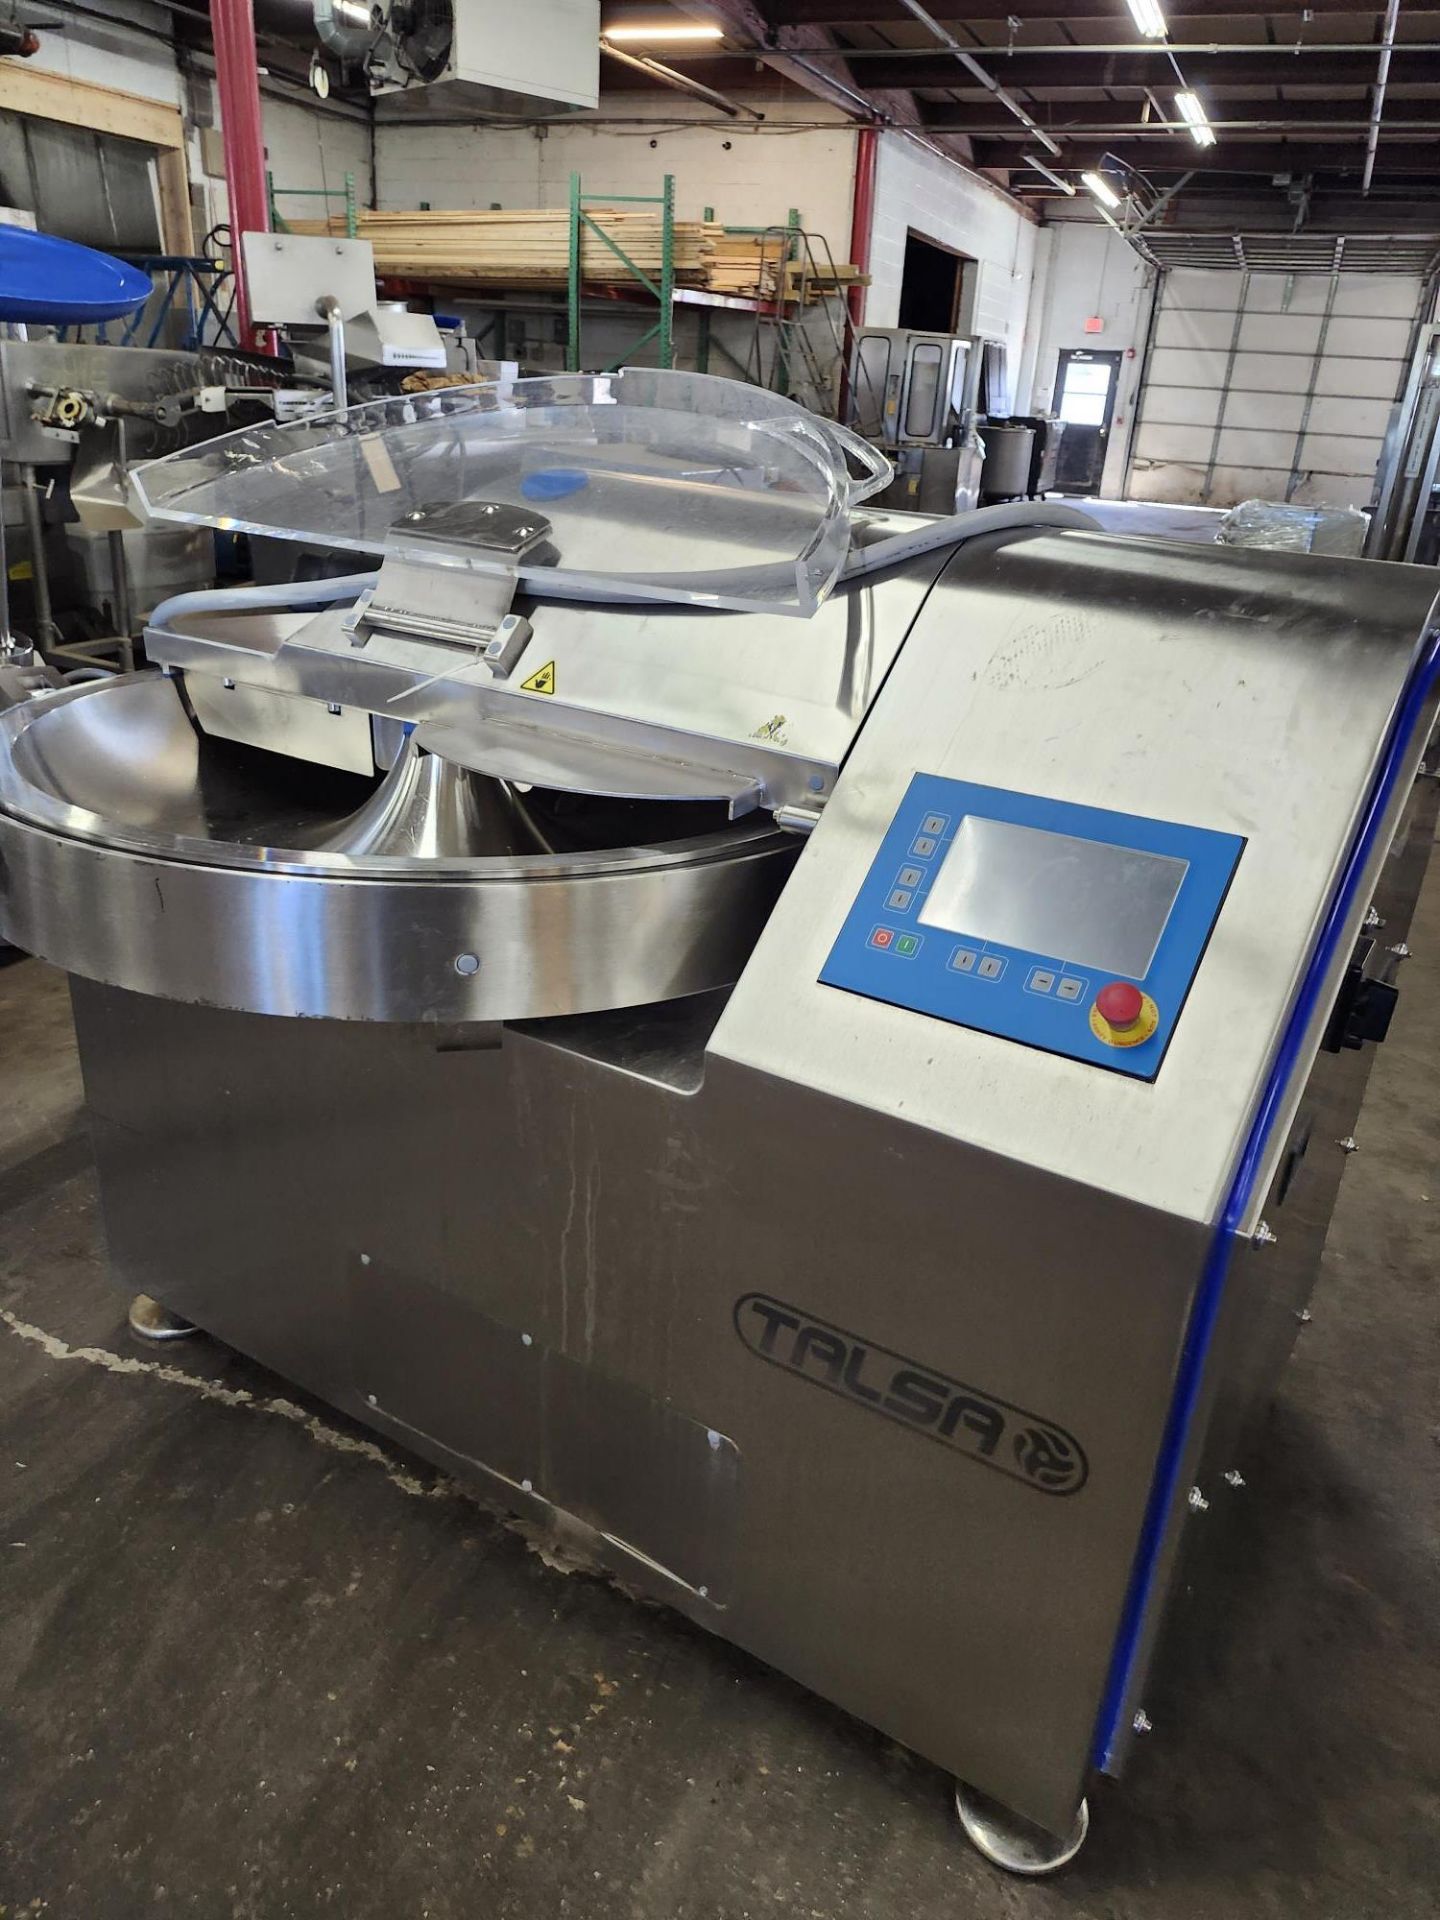 Talsa Mdl. K120 Bowl Chopper, 220 volts, 3 phase, 60 hz (Located in Sandwich, IL) - Image 2 of 10